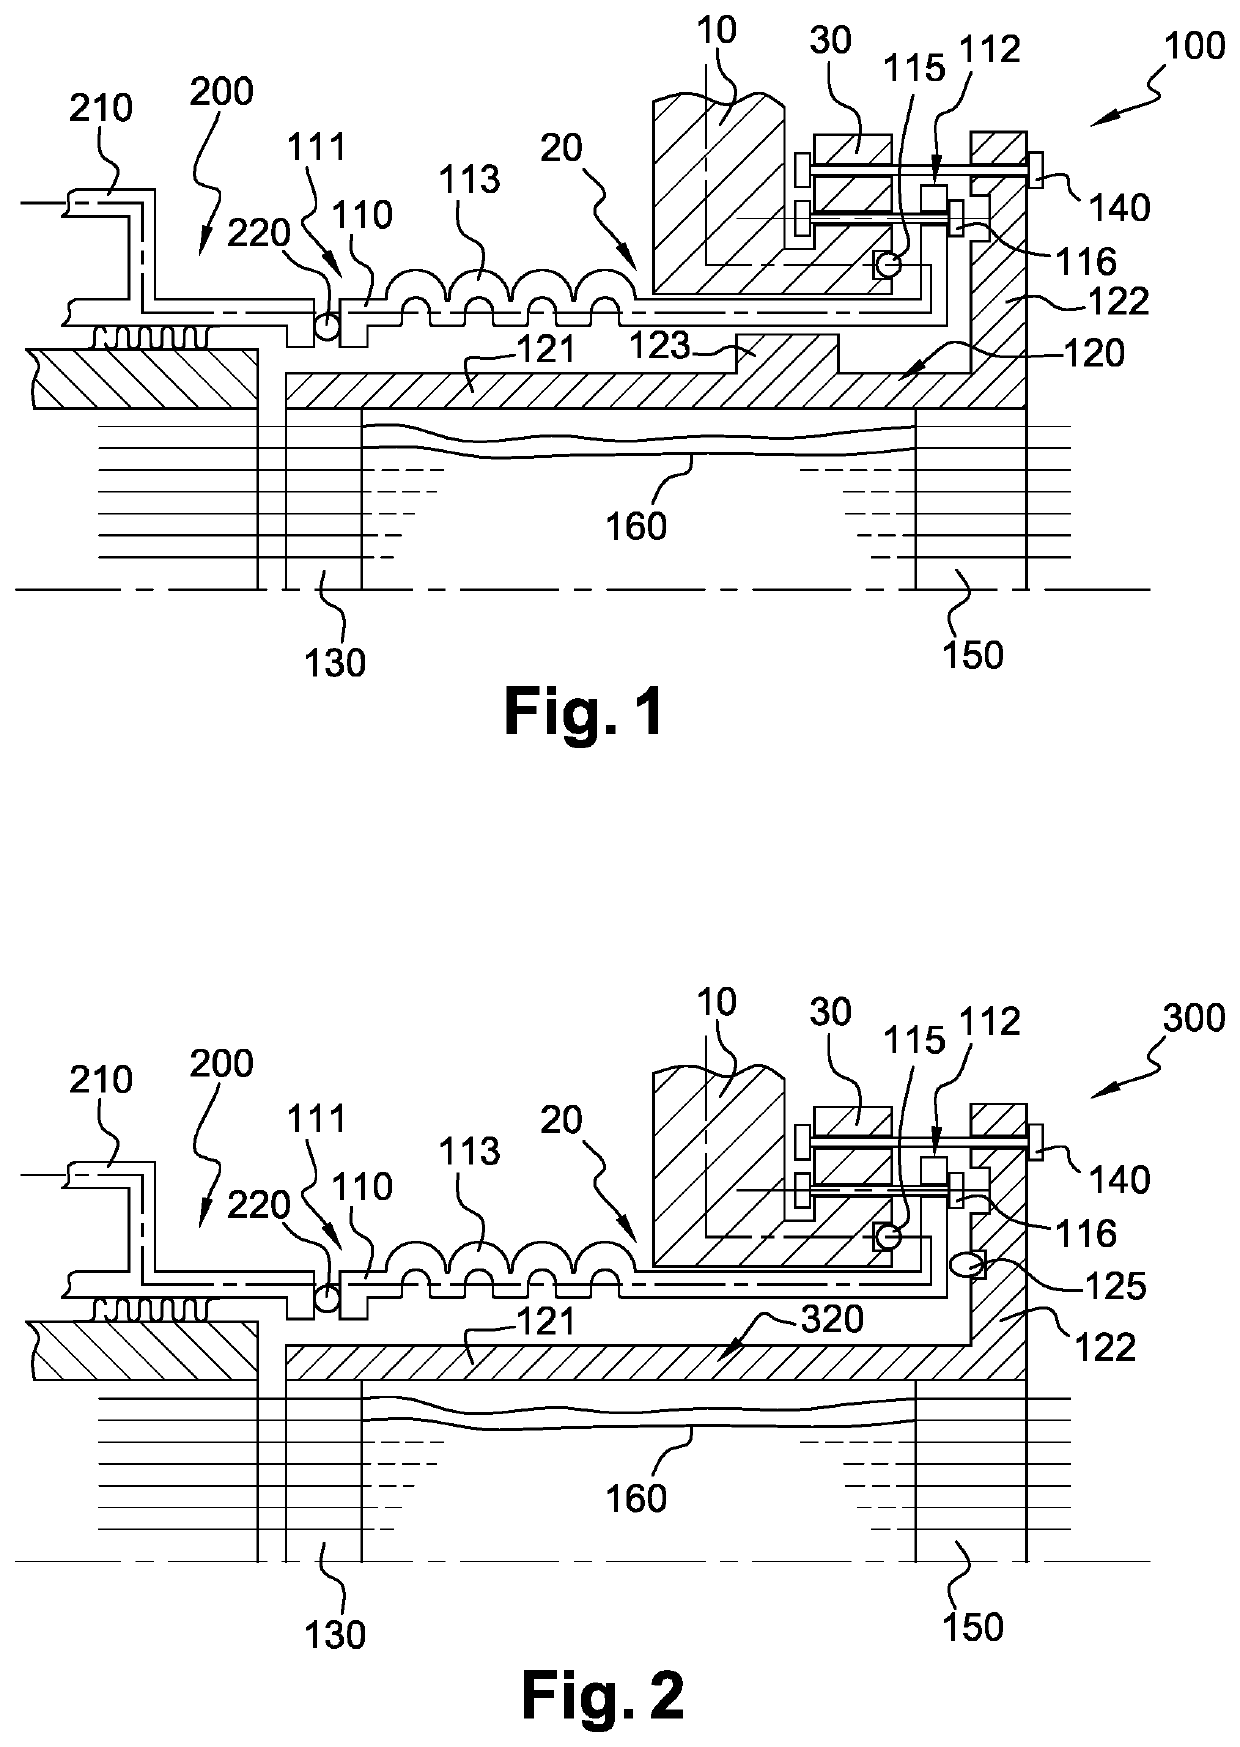 Vessel electrical penetration assembly for a nuclear reactor